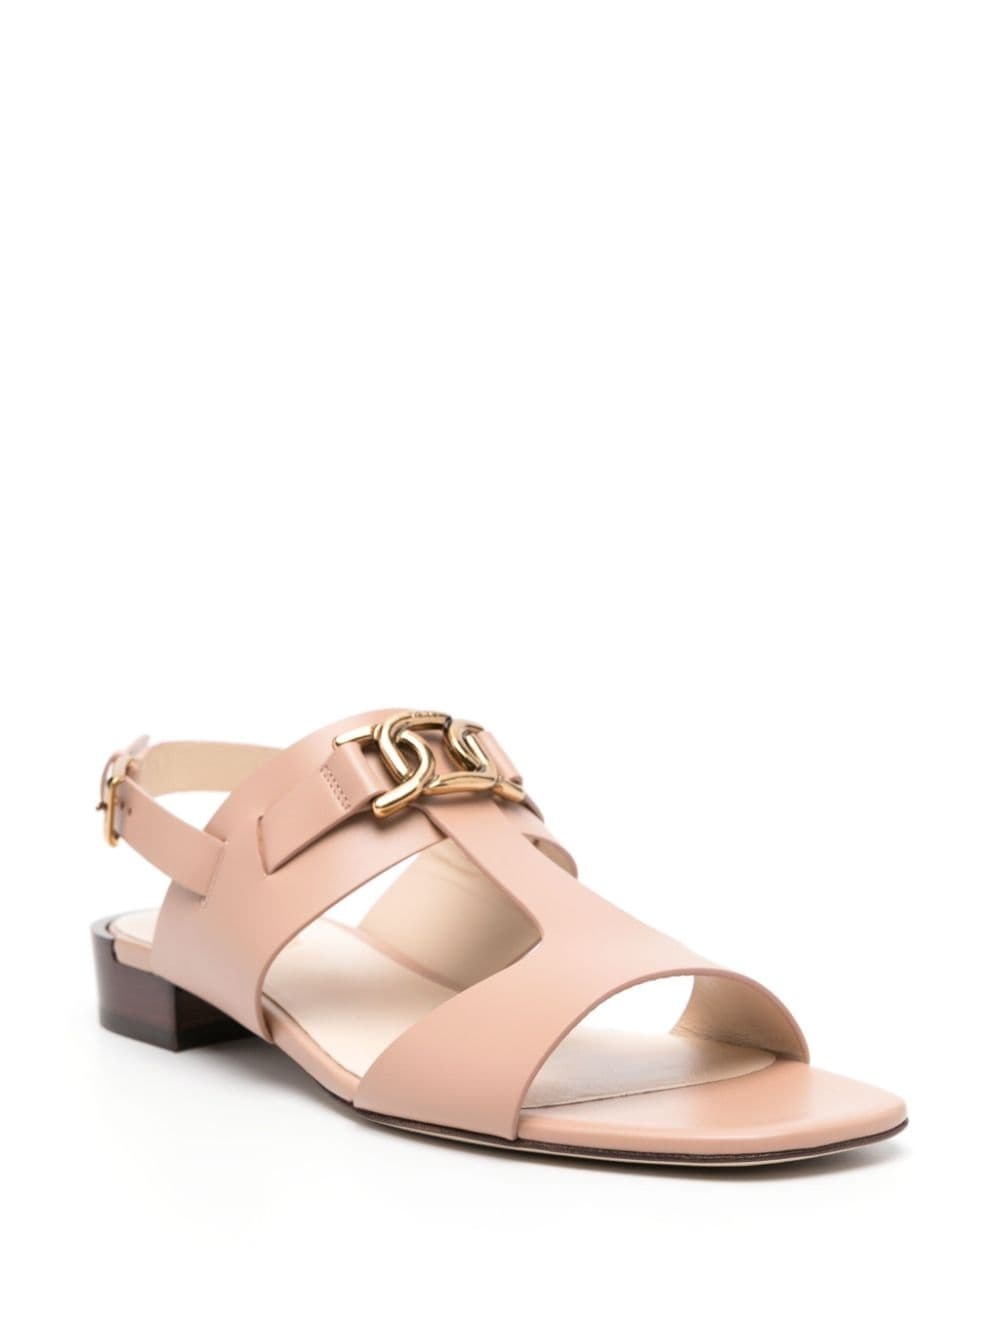 Kate leather sandals - 2